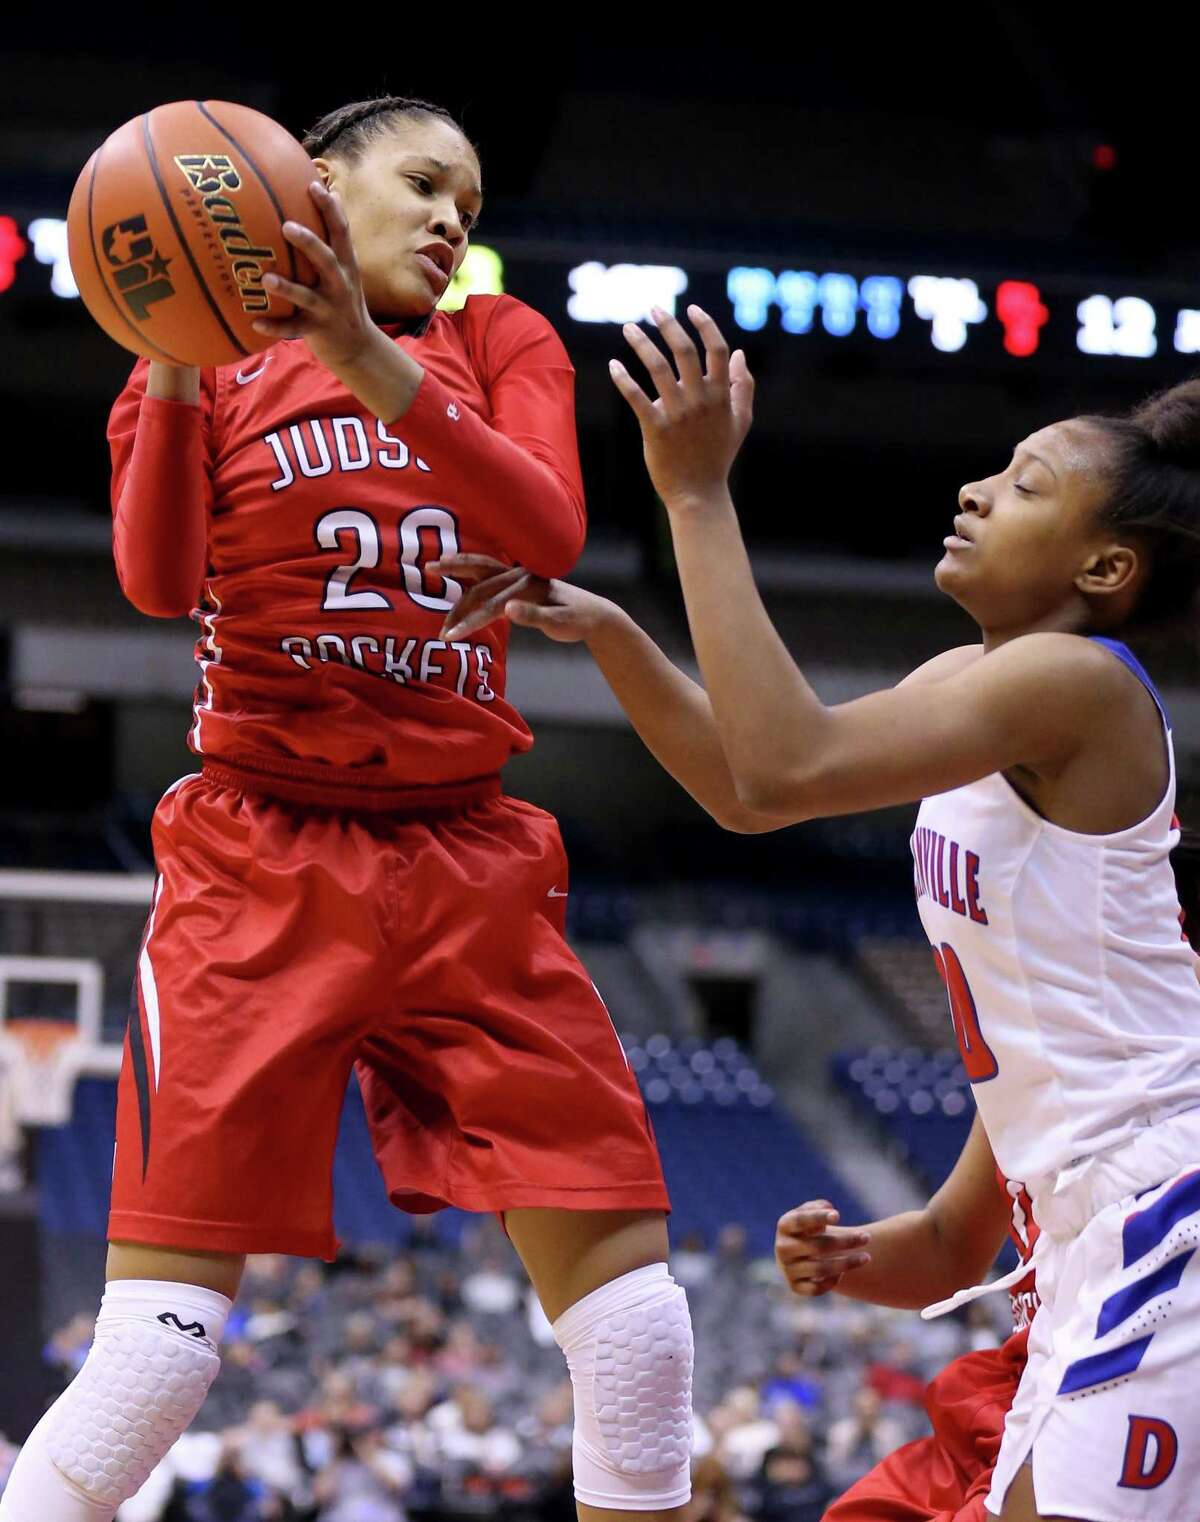 Judson's Tiffany McGarity grabs a rebound around Duncanville's Aniya Thomas during first half action of their Class 6A state semifinal game held Friday March 3, 2017 at the Alamodome.